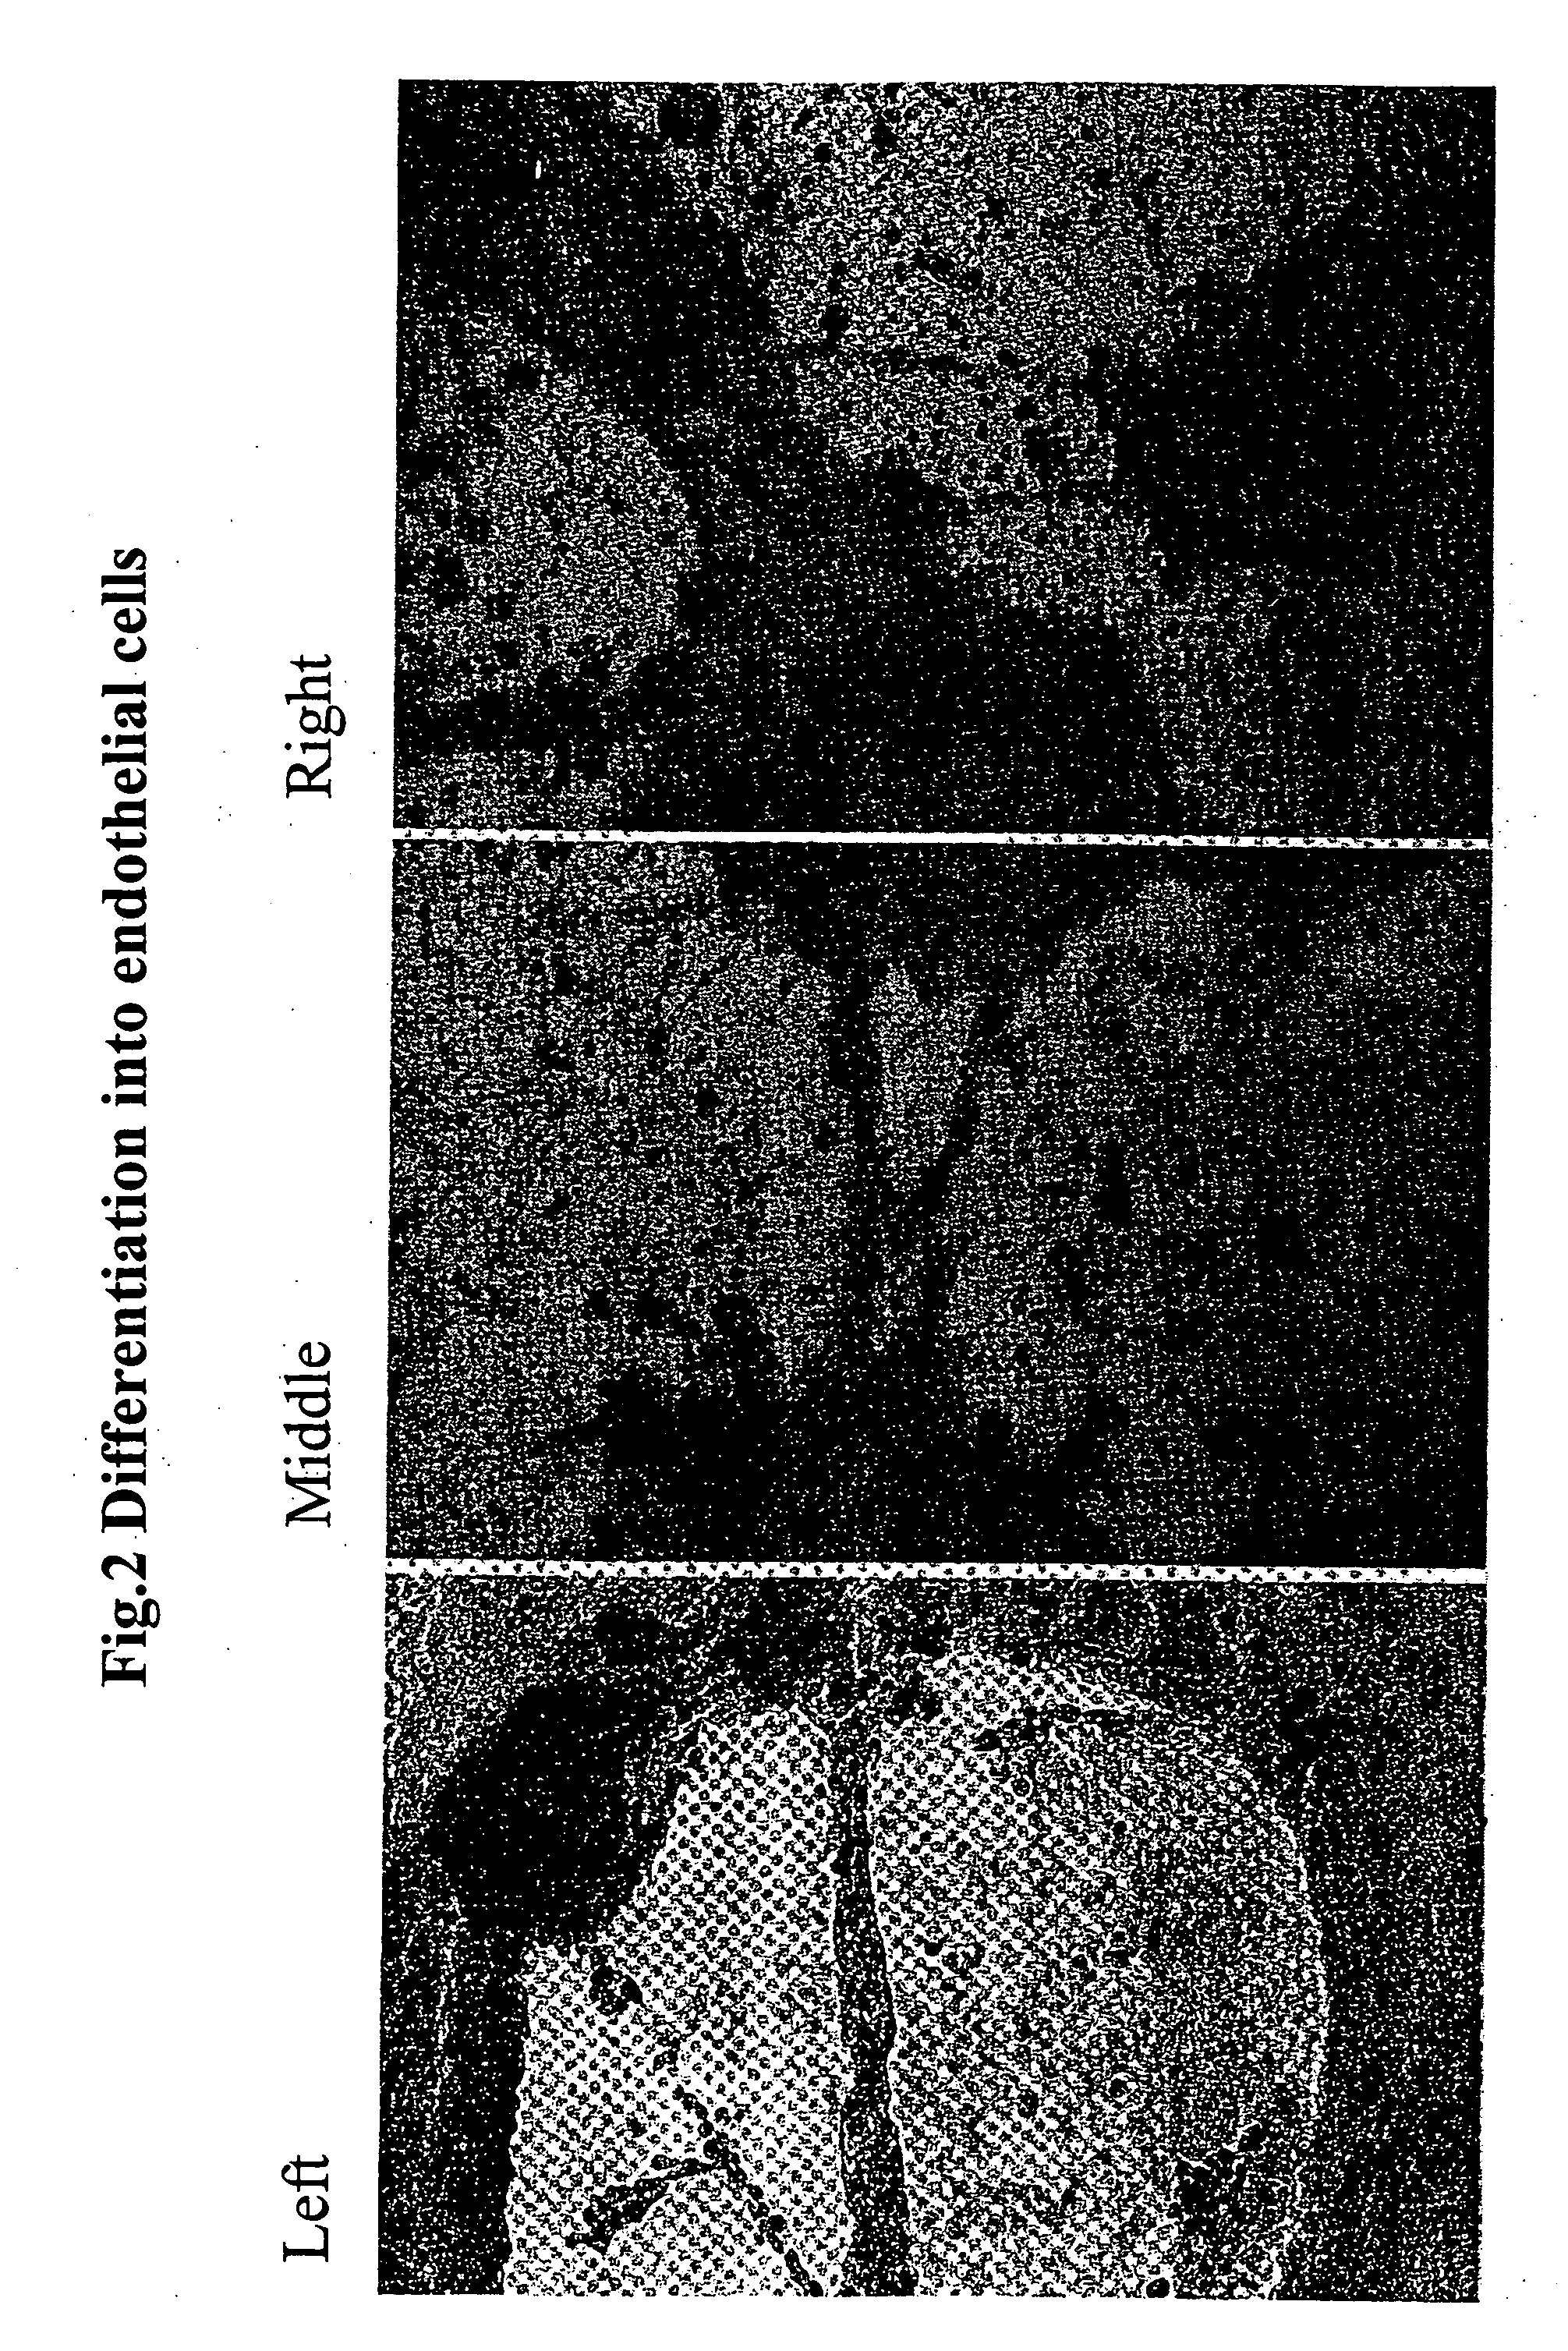 Dedifferentiated, programmable stem cells of monocytic origin, and their production and use